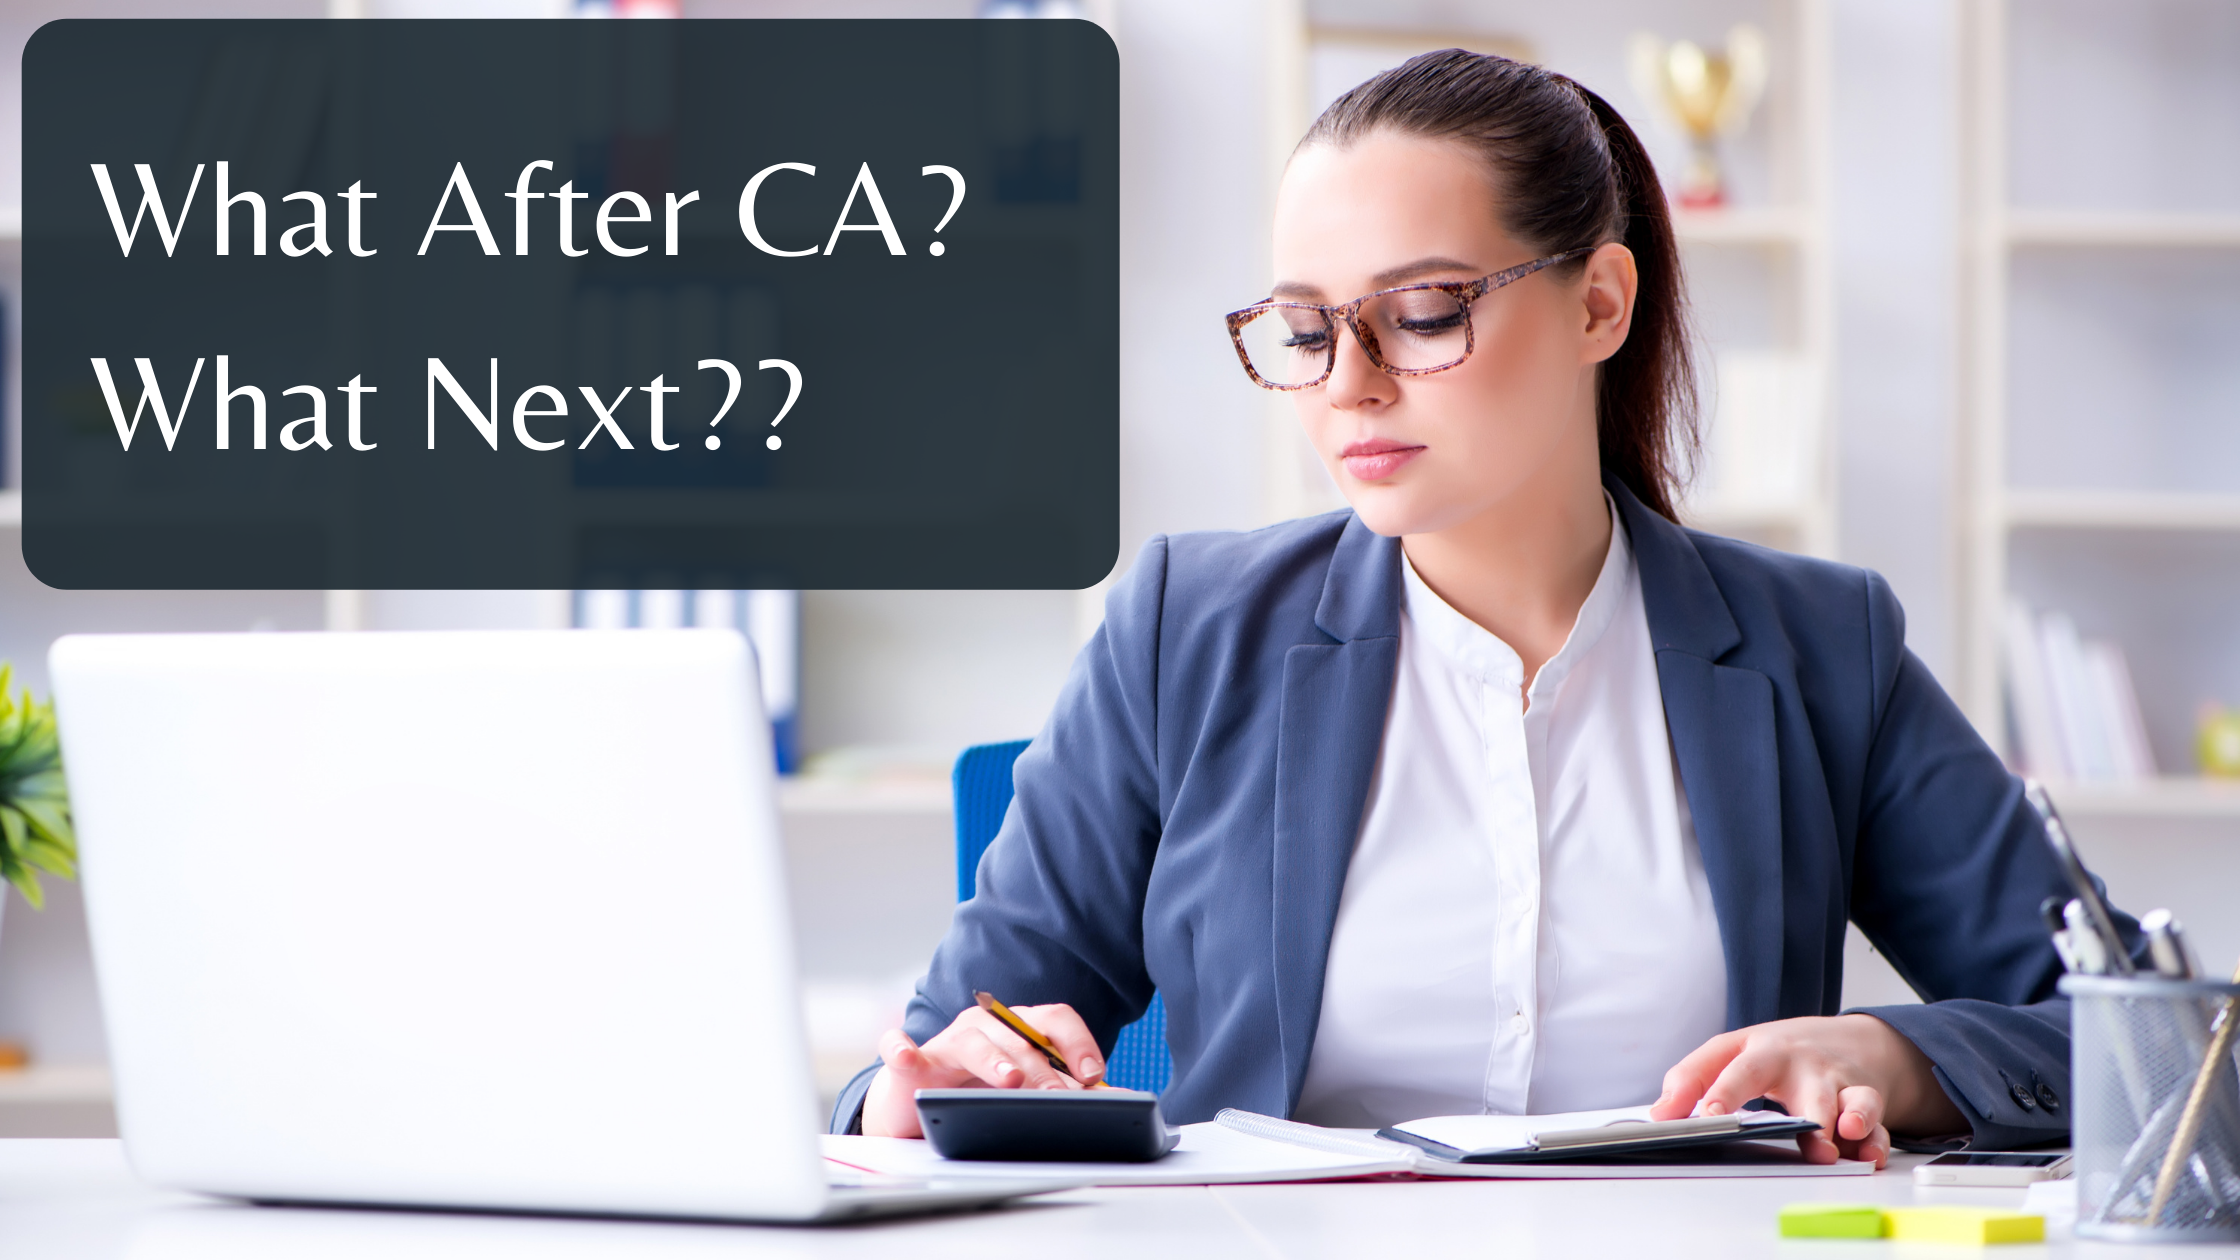 What Next? Career Options After CA - CA Test Series